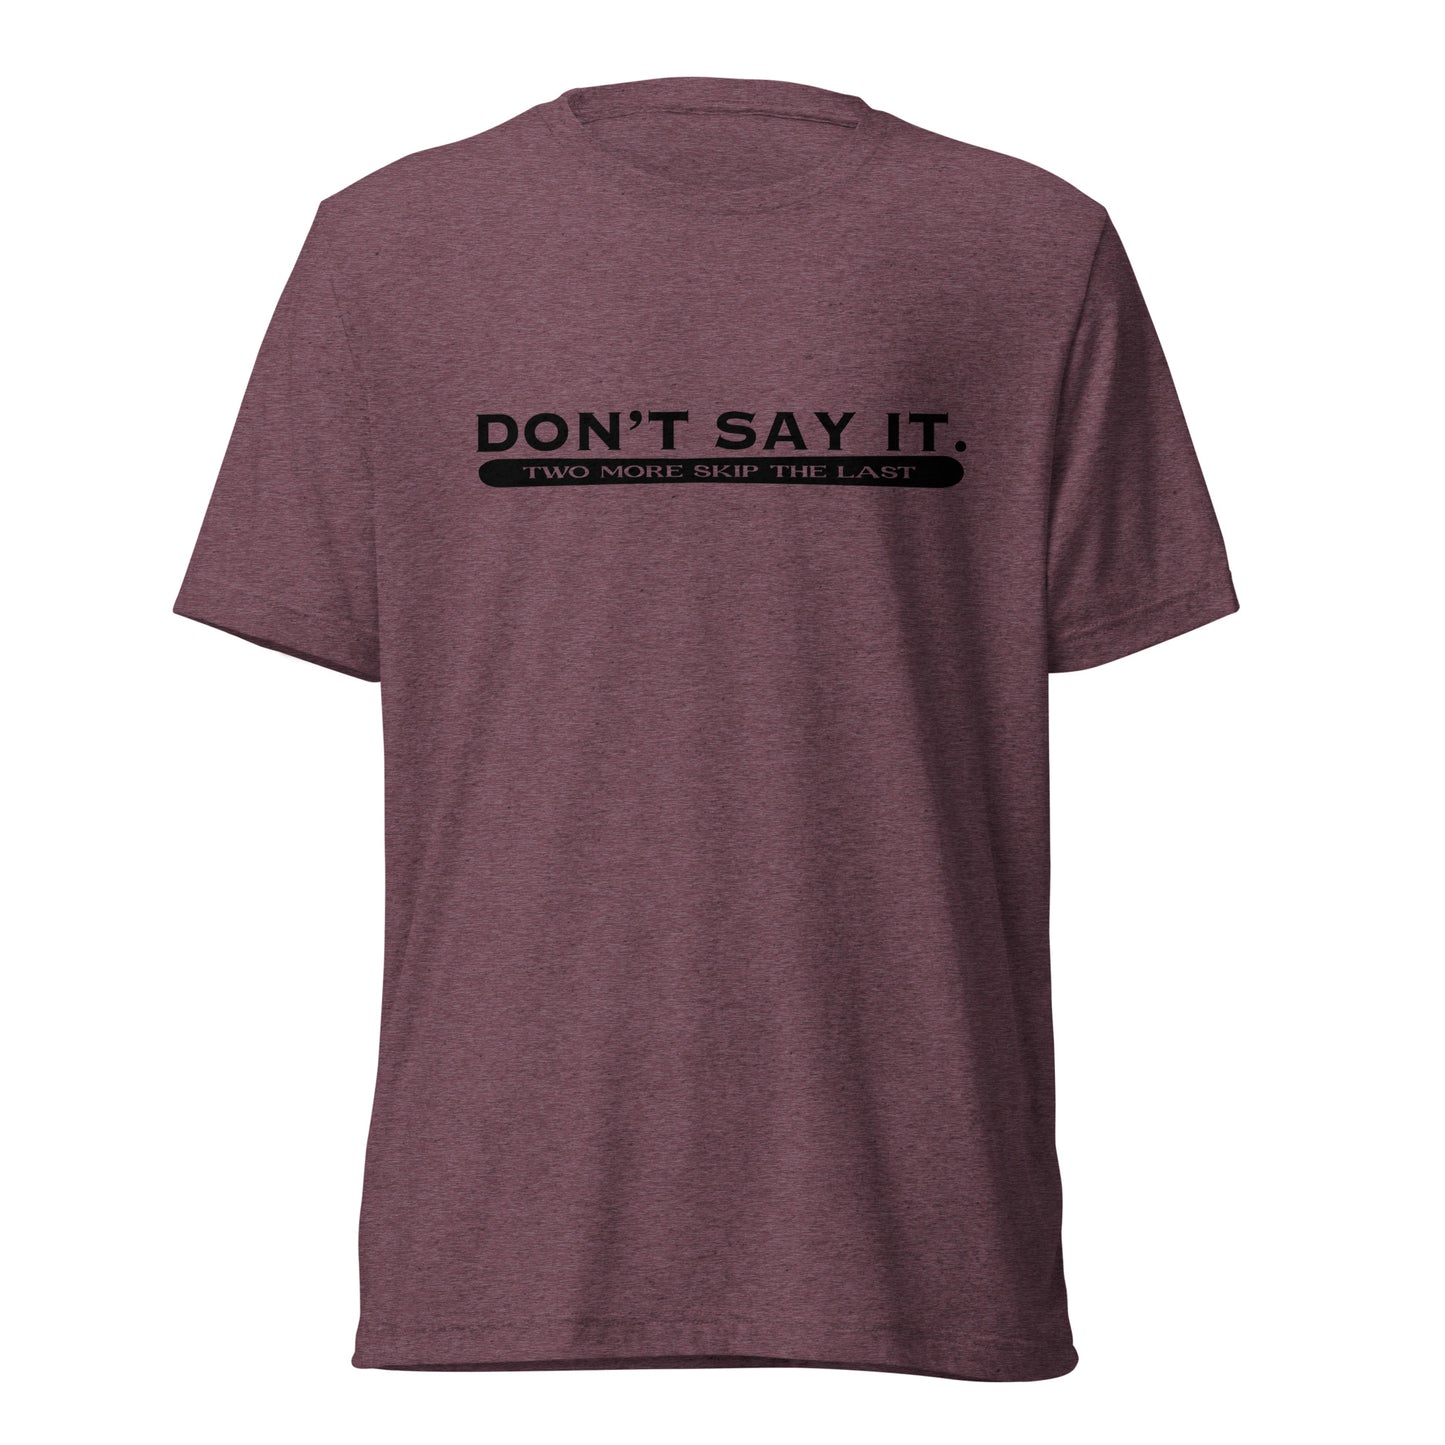 Two More Skip The Last "Don't Say It" maroon unisex tri-blend short sleeve t-shirt. Front view